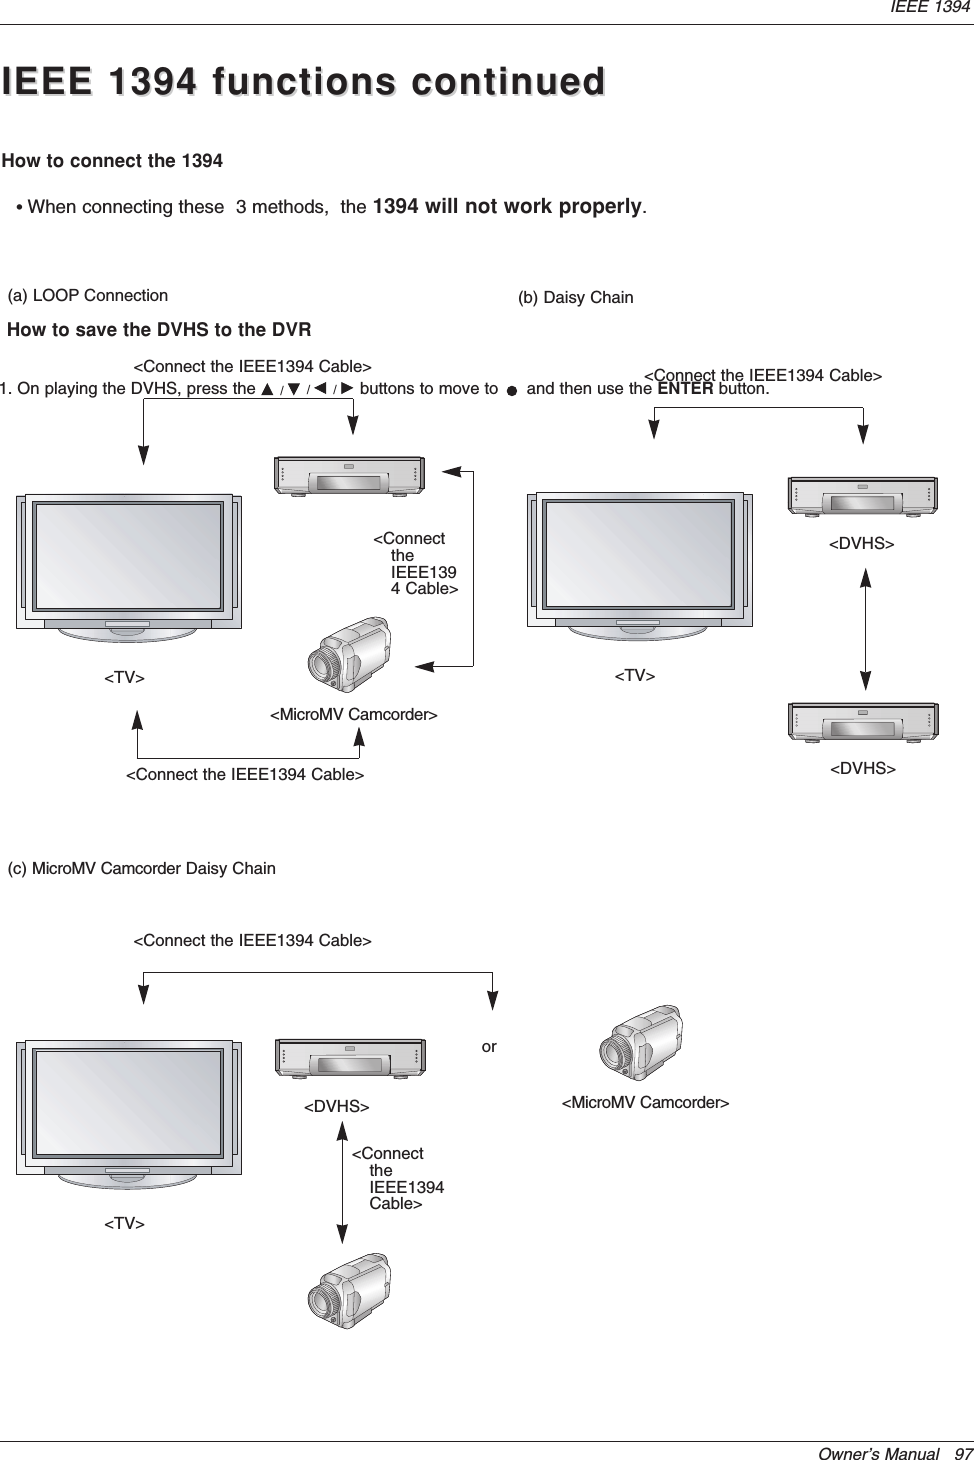 Owner’s Manual   97IEEE 1394IEEE 1394 functions continuedIEEE 1394 functions continuedHow to connect the 1394• When connecting these  3 methods,  the 1394 will not work properly. (a) LOOP Connection&lt;Connect the IEEE1394 Cable&gt;&lt;TV&gt;&lt;MicroMV Camcorder&gt;&lt;Connect the IEEE1394 Cable&gt;(b) Daisy Chain&lt;Connect the IEEE1394 Cable&gt;&lt;TV&gt;&lt;DVHS&gt;&lt;DVHS&gt;&lt;ConnecttheIEEE1394 Cable&gt;(c) MicroMV Camcorder Daisy Chain&lt;Connect the IEEE1394 Cable&gt;&lt;TV&gt;&lt;DVHS&gt;&lt;ConnecttheIEEE1394Cable&gt;&lt;MicroMV Camcorder&gt;orVHow to save the DVHS to the DVR1. On playing the DVHS, press the D / E/ F / G buttons to move to &quot;and then use the ENTER button.